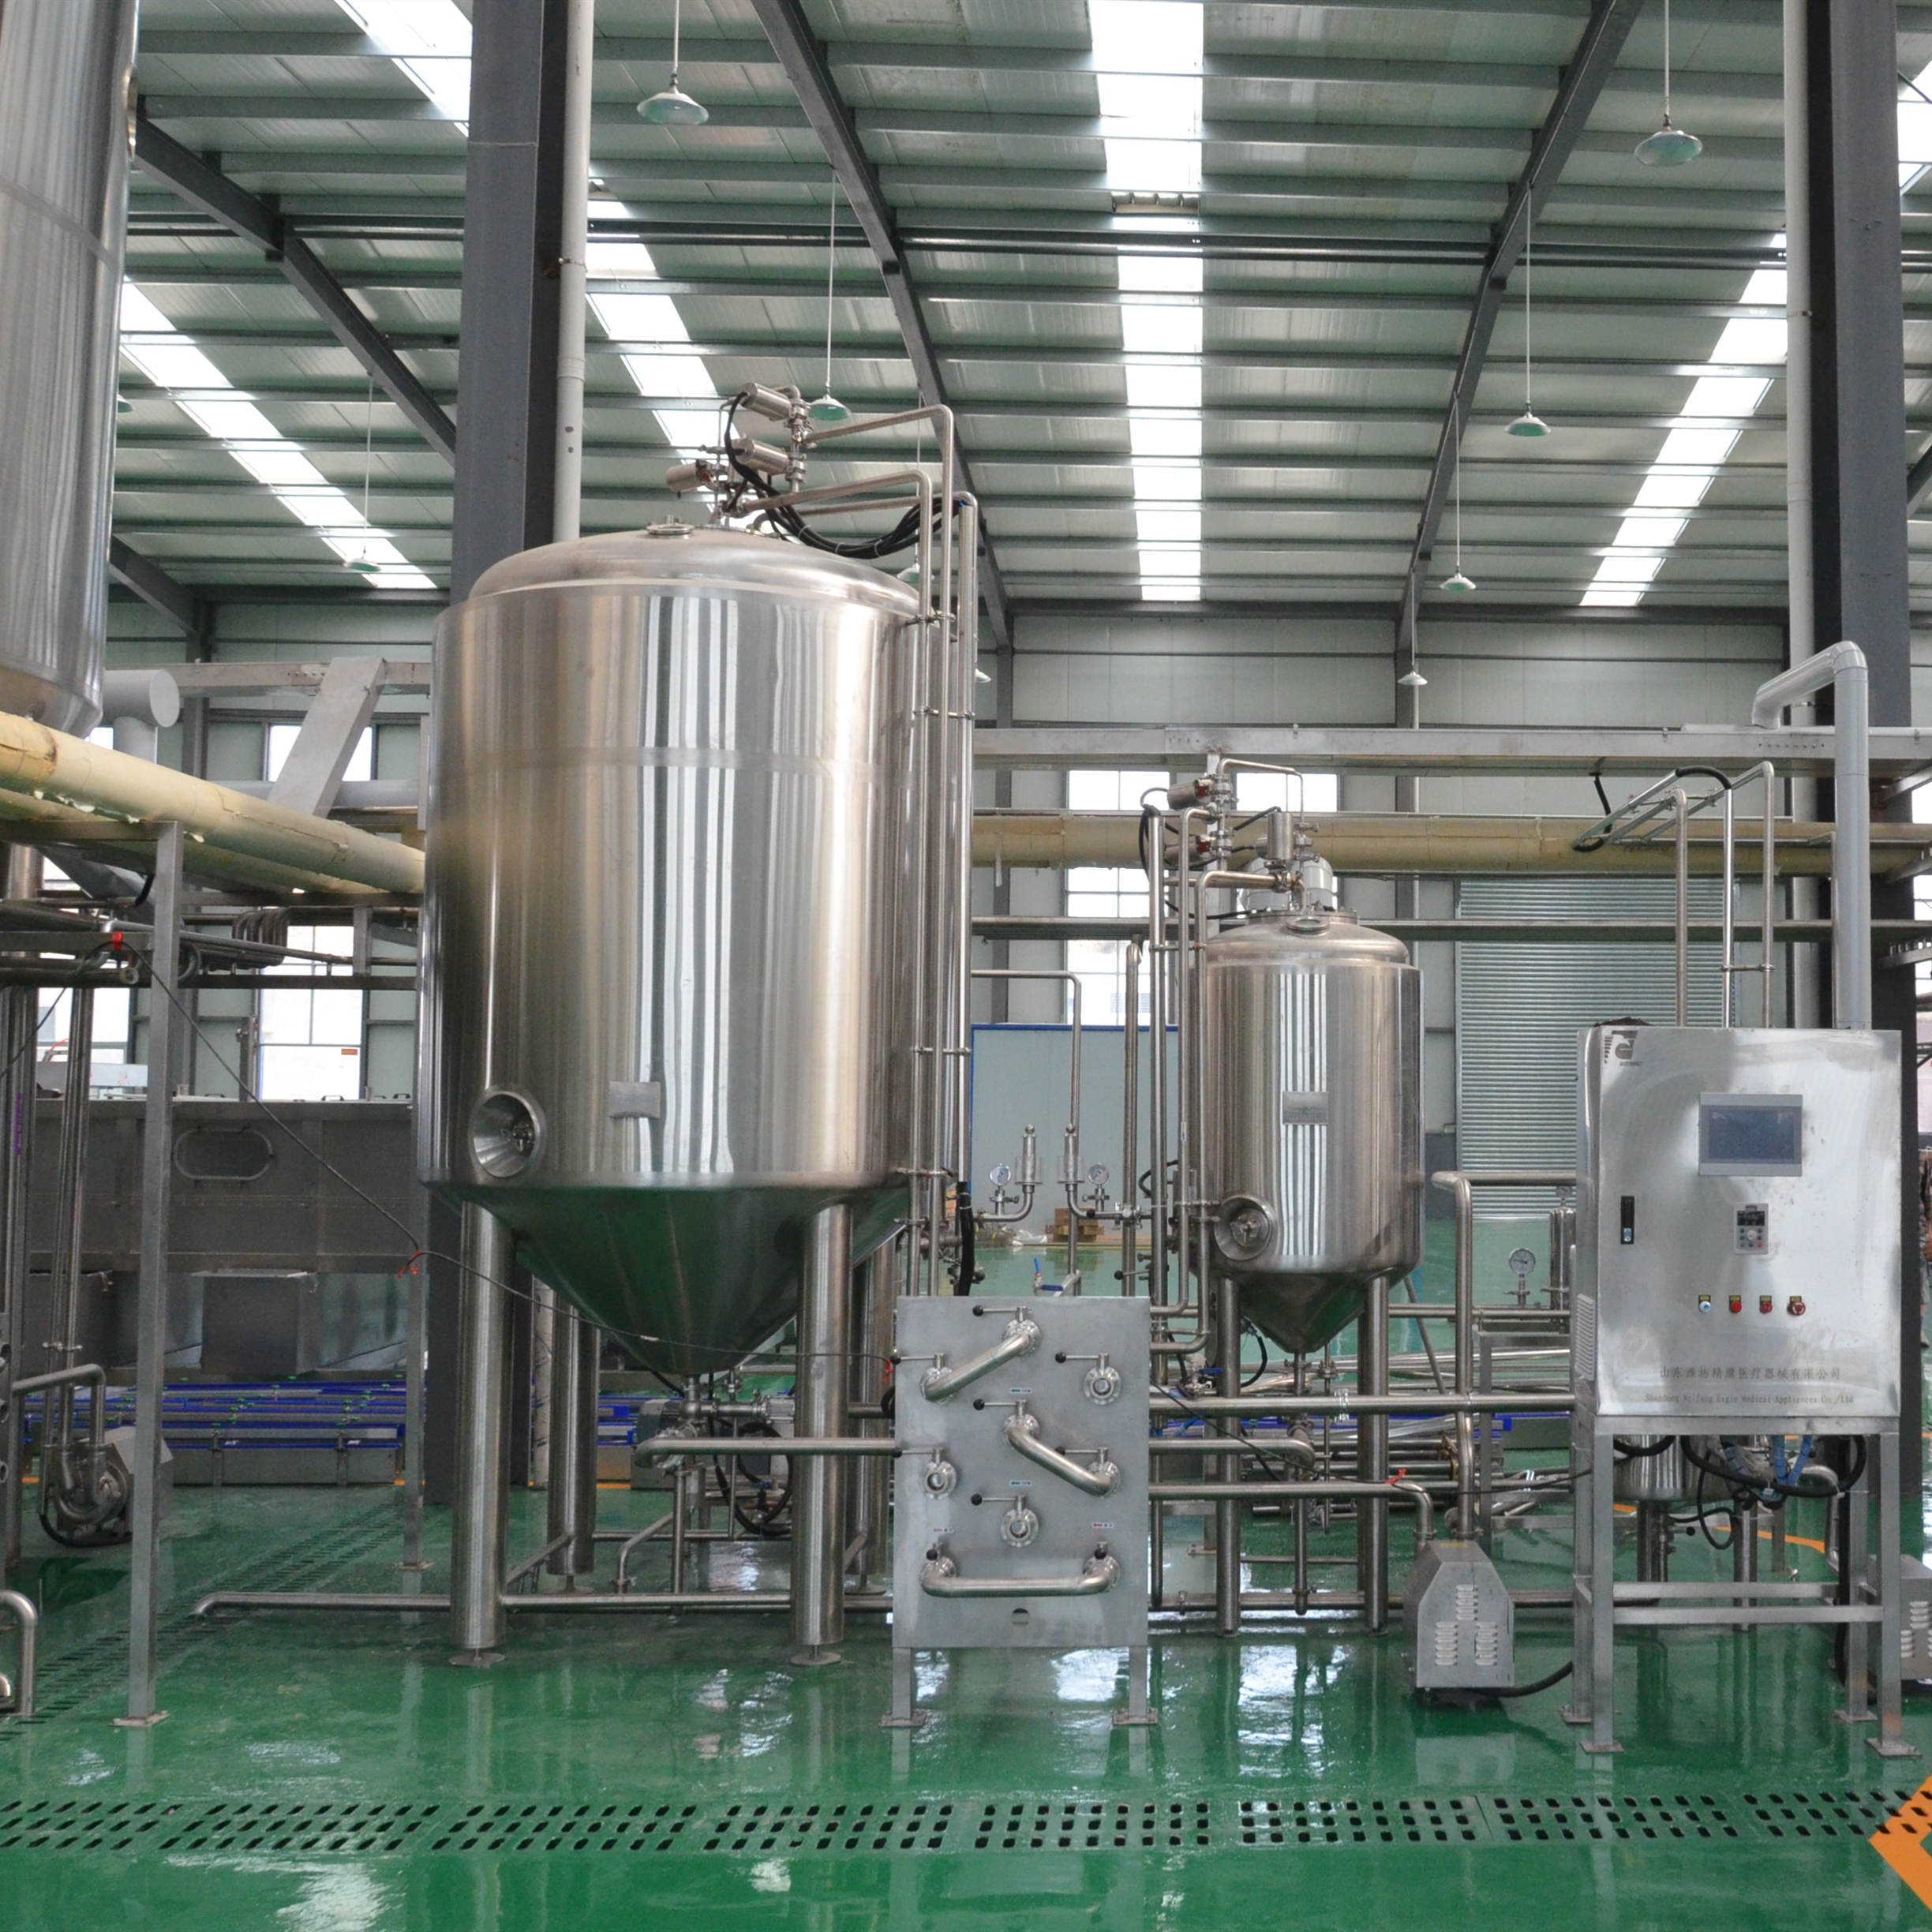 Stainless steel big size commercial industrial beer making equipment from Chinese factory hot sell in Australia Z13